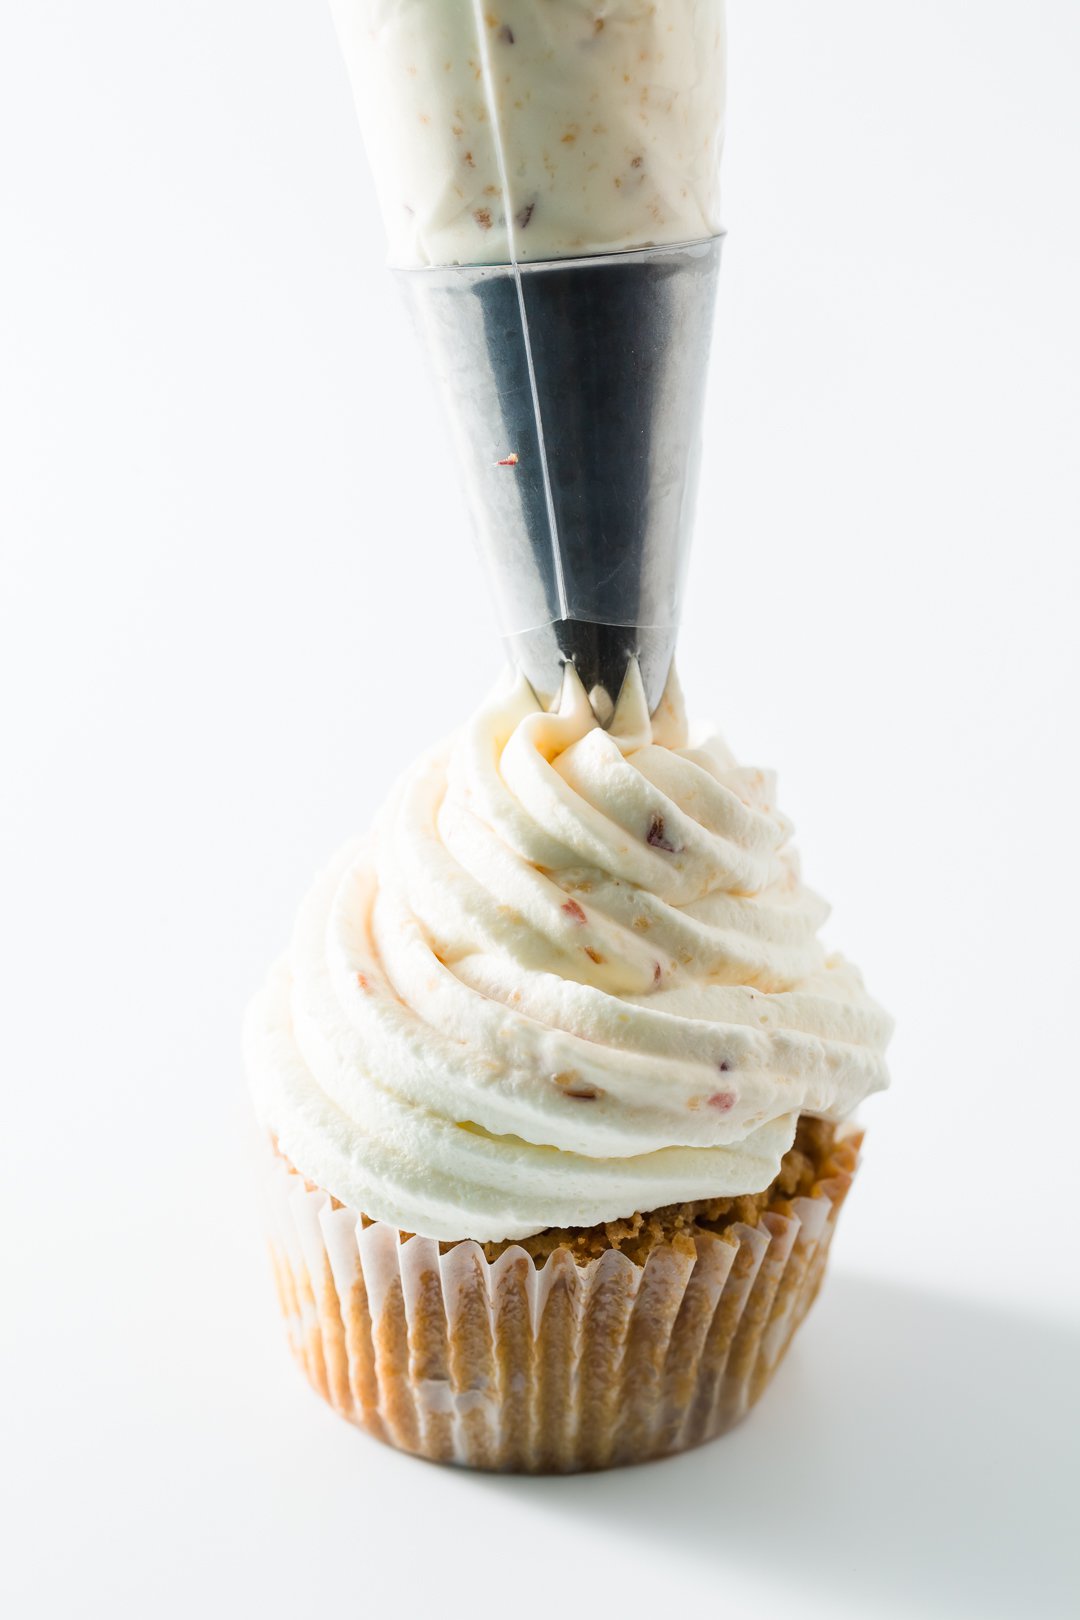 Peach whipped cream being piped onto a cupcake